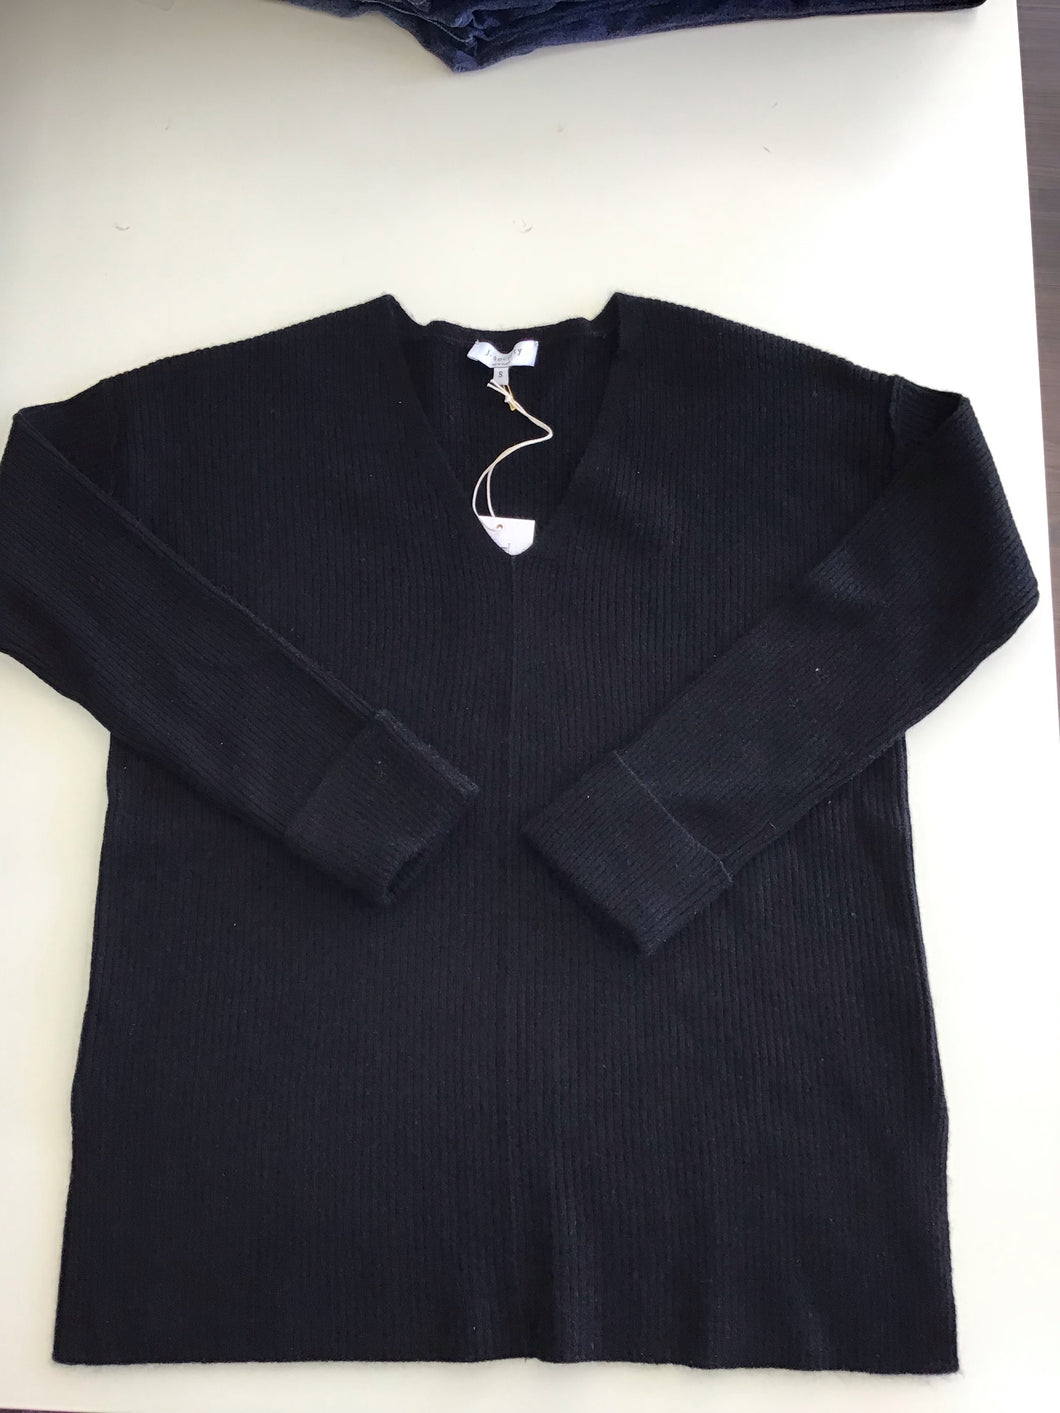 Exclusive Ribbed Cuffed Cashmere Sweater in Black by J Society